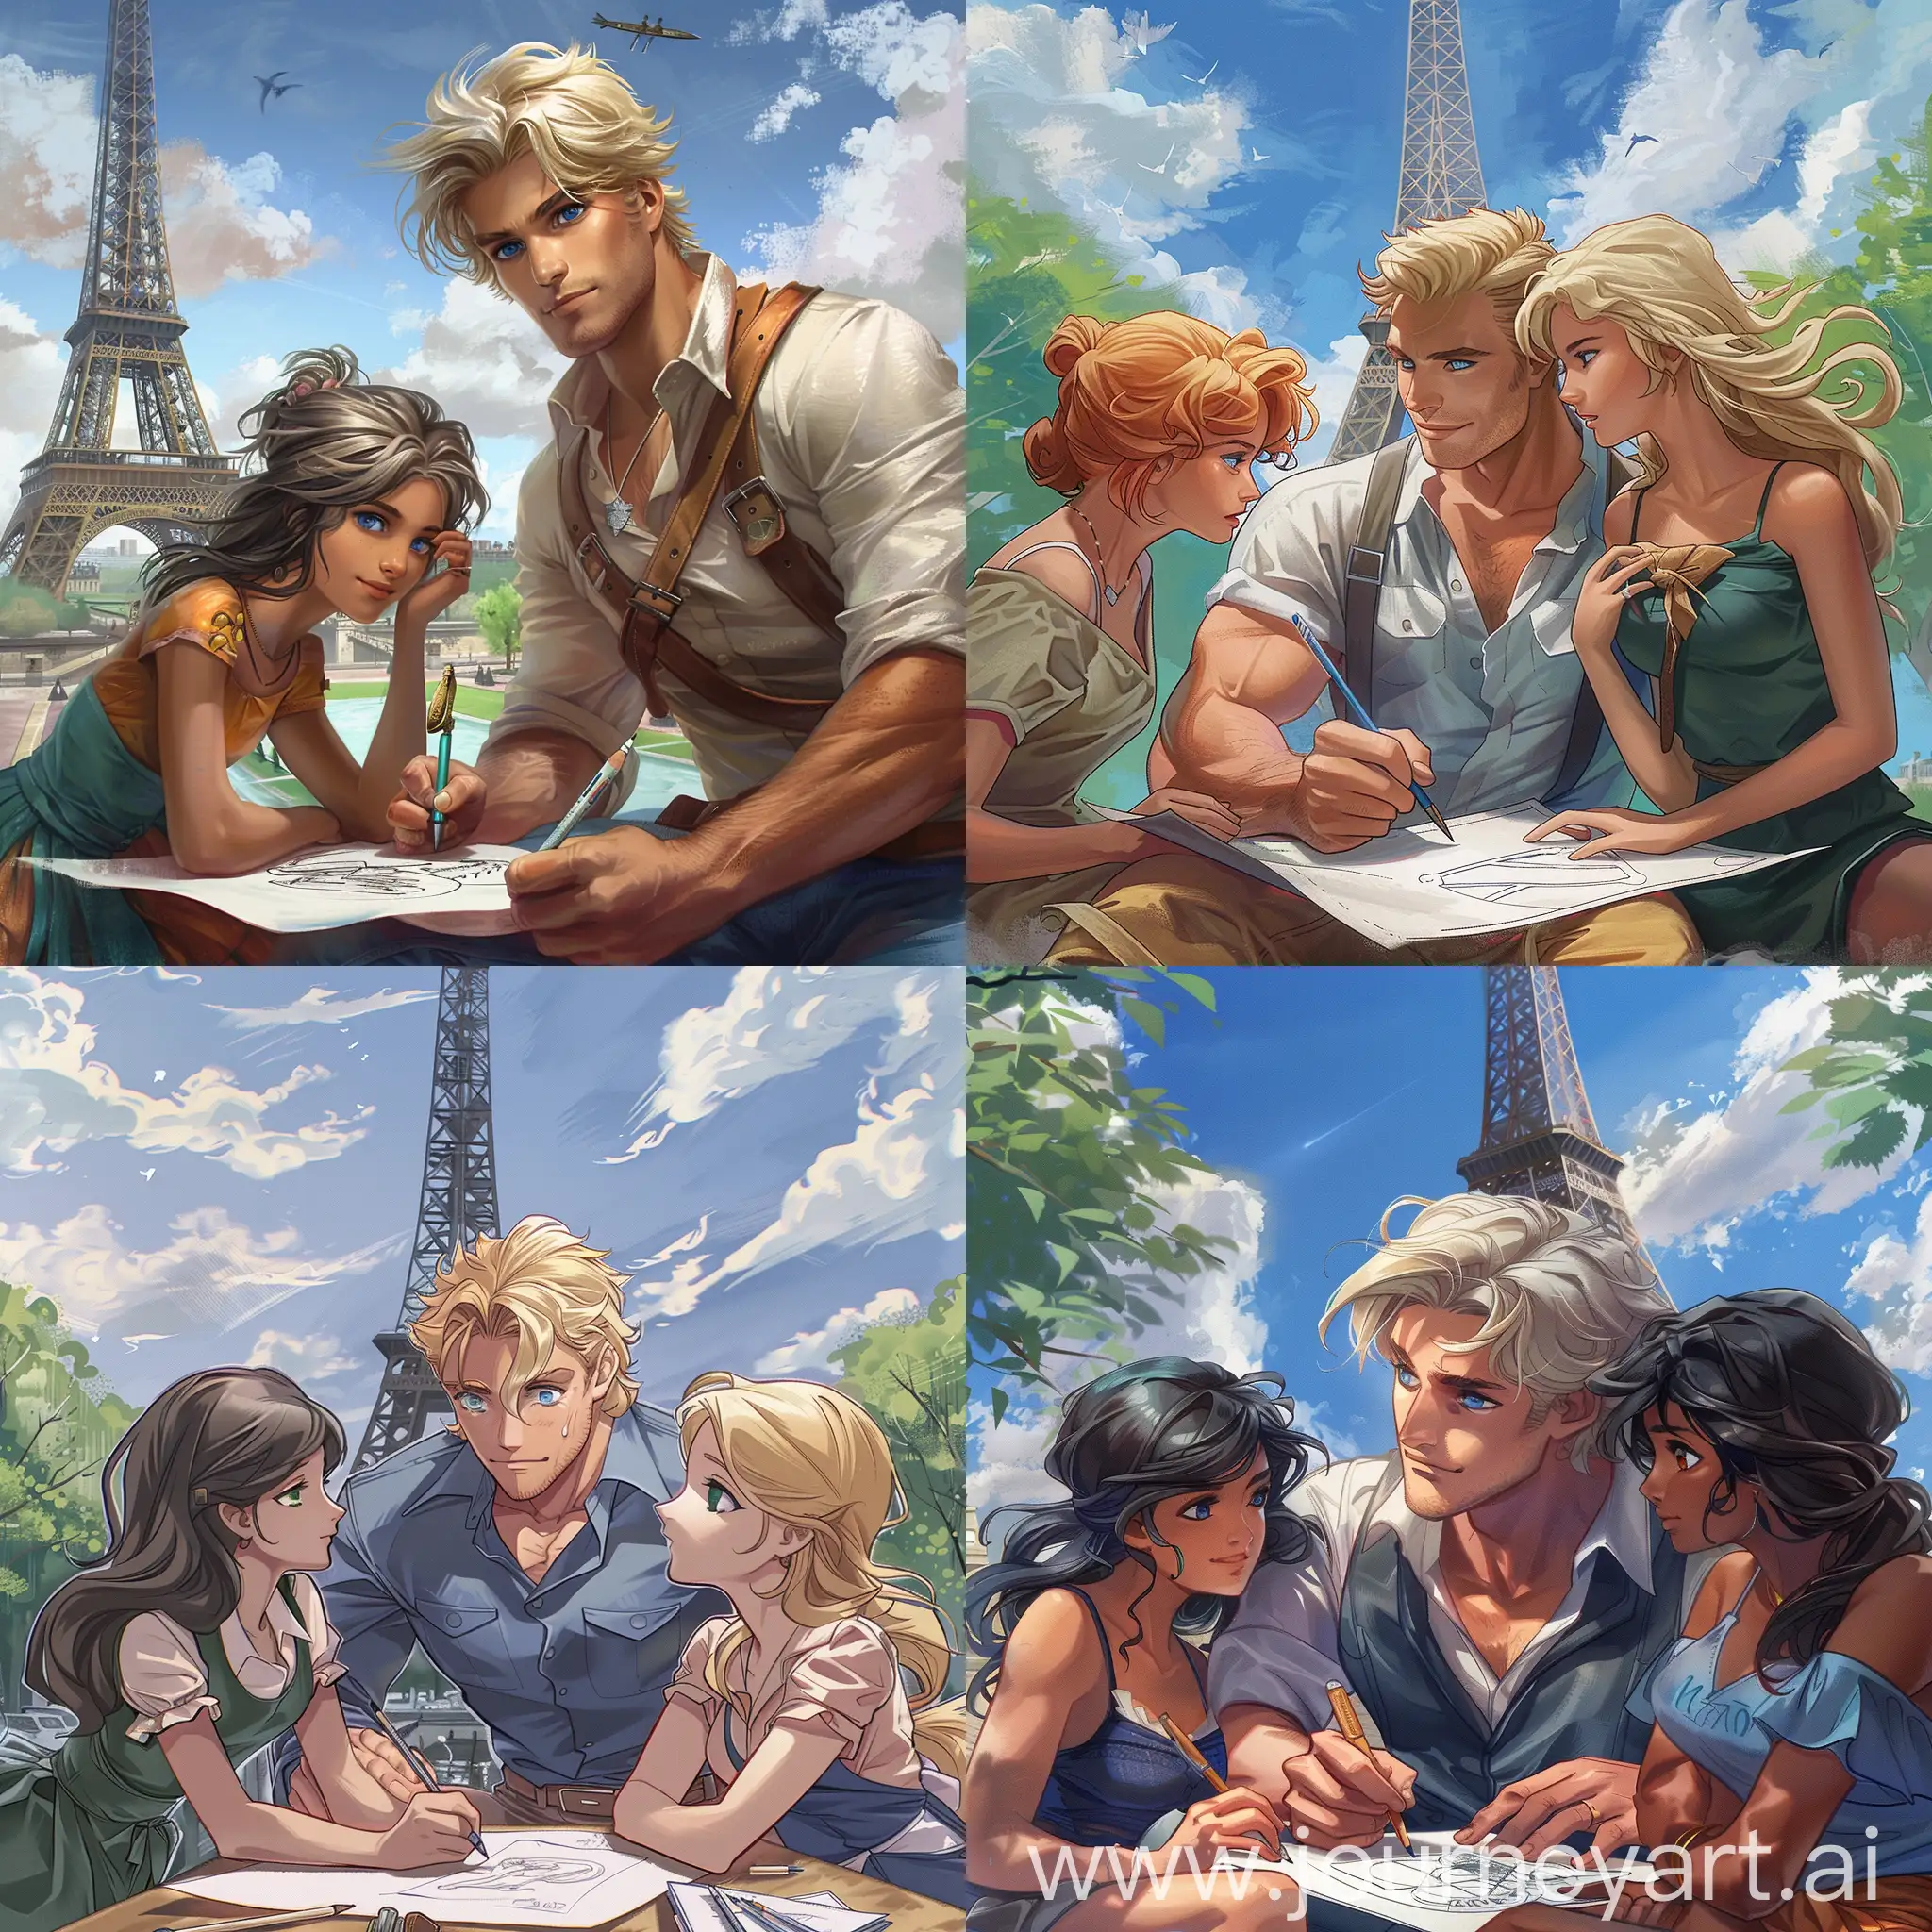 Blond-Man-Drawing-with-Two-Girls-at-the-Eiffel-Tower